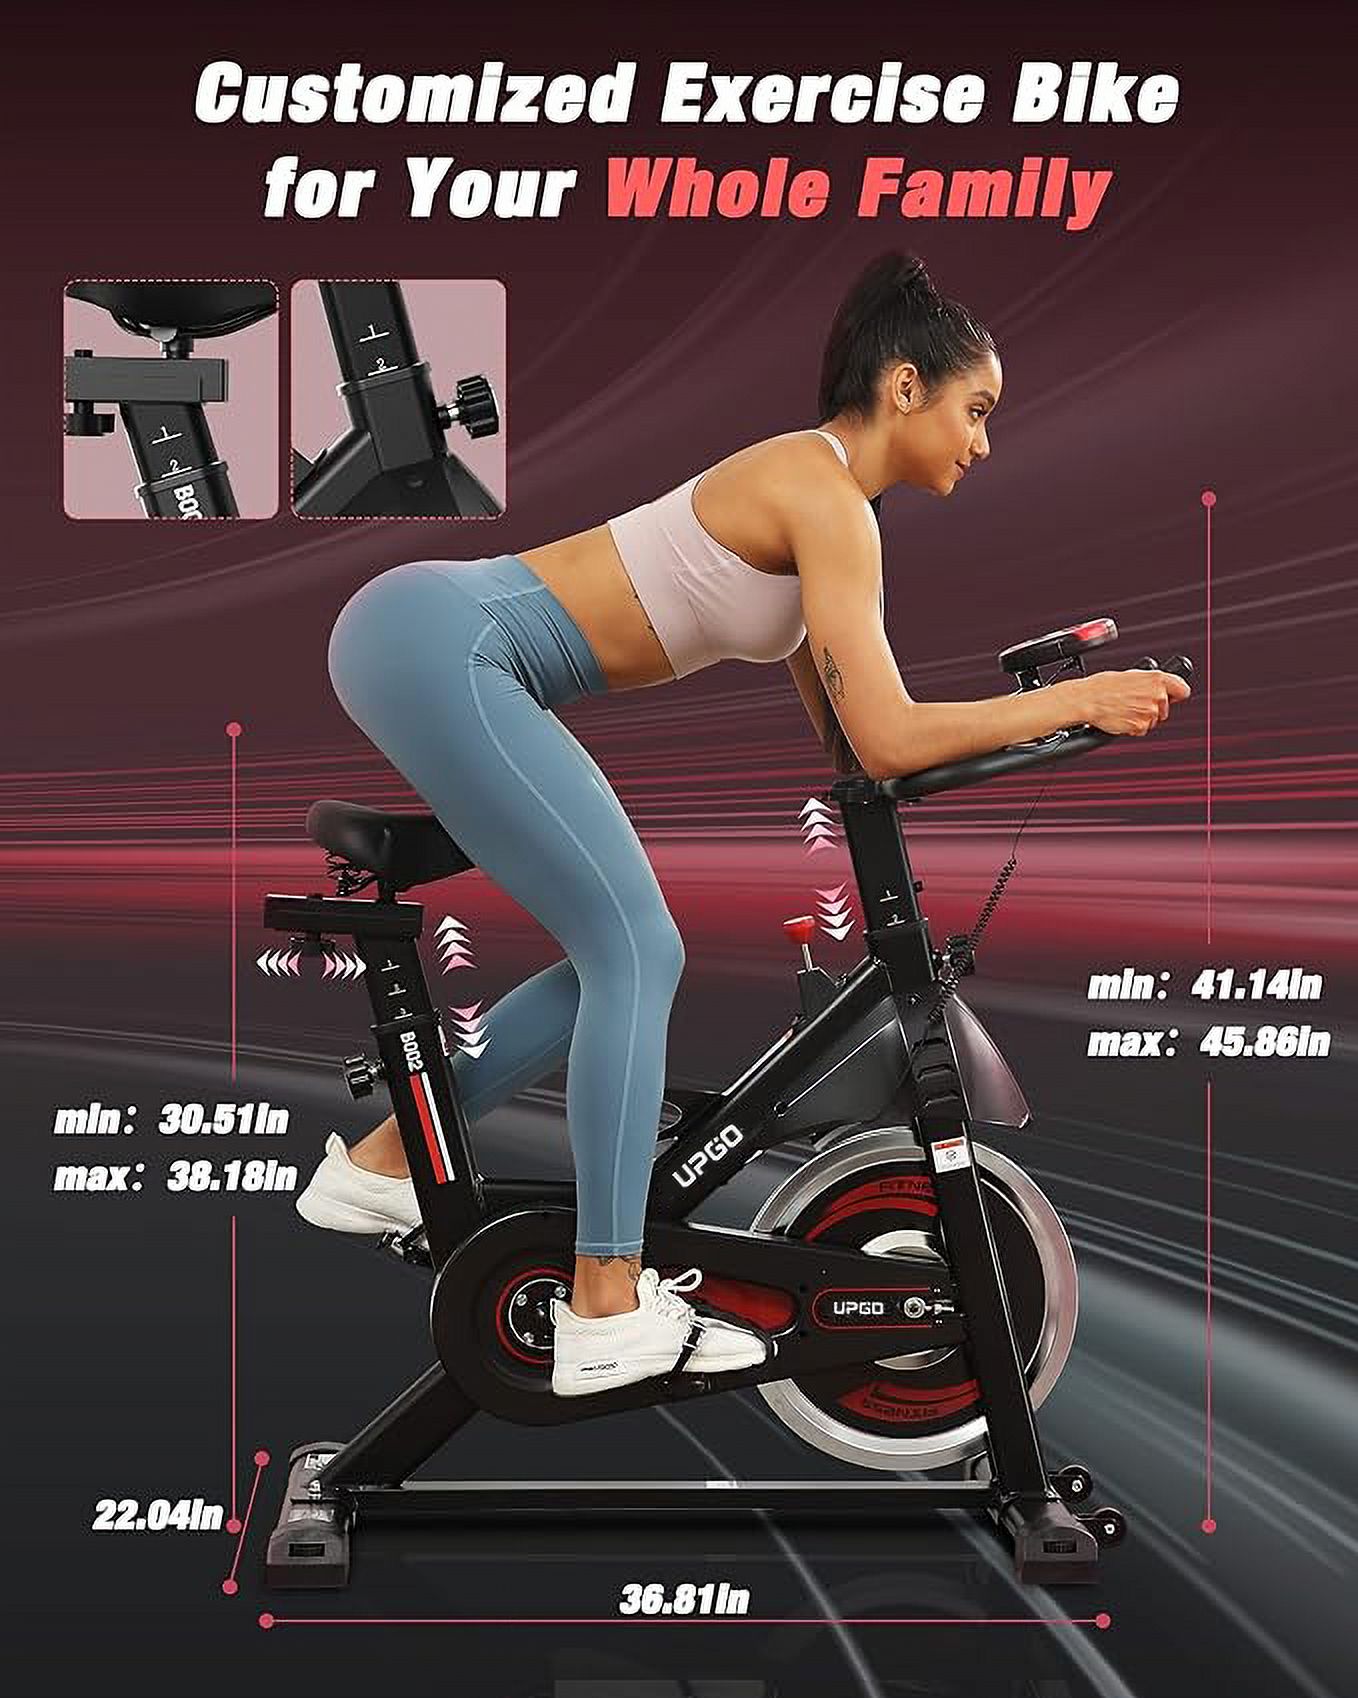 UPGO Exercise Bike-Stationary Indoor Cycling Bike for Home 270 Lbs Weight Capacity, Comfortable Seat Cushion and iPad Holder Red - image 3 of 7